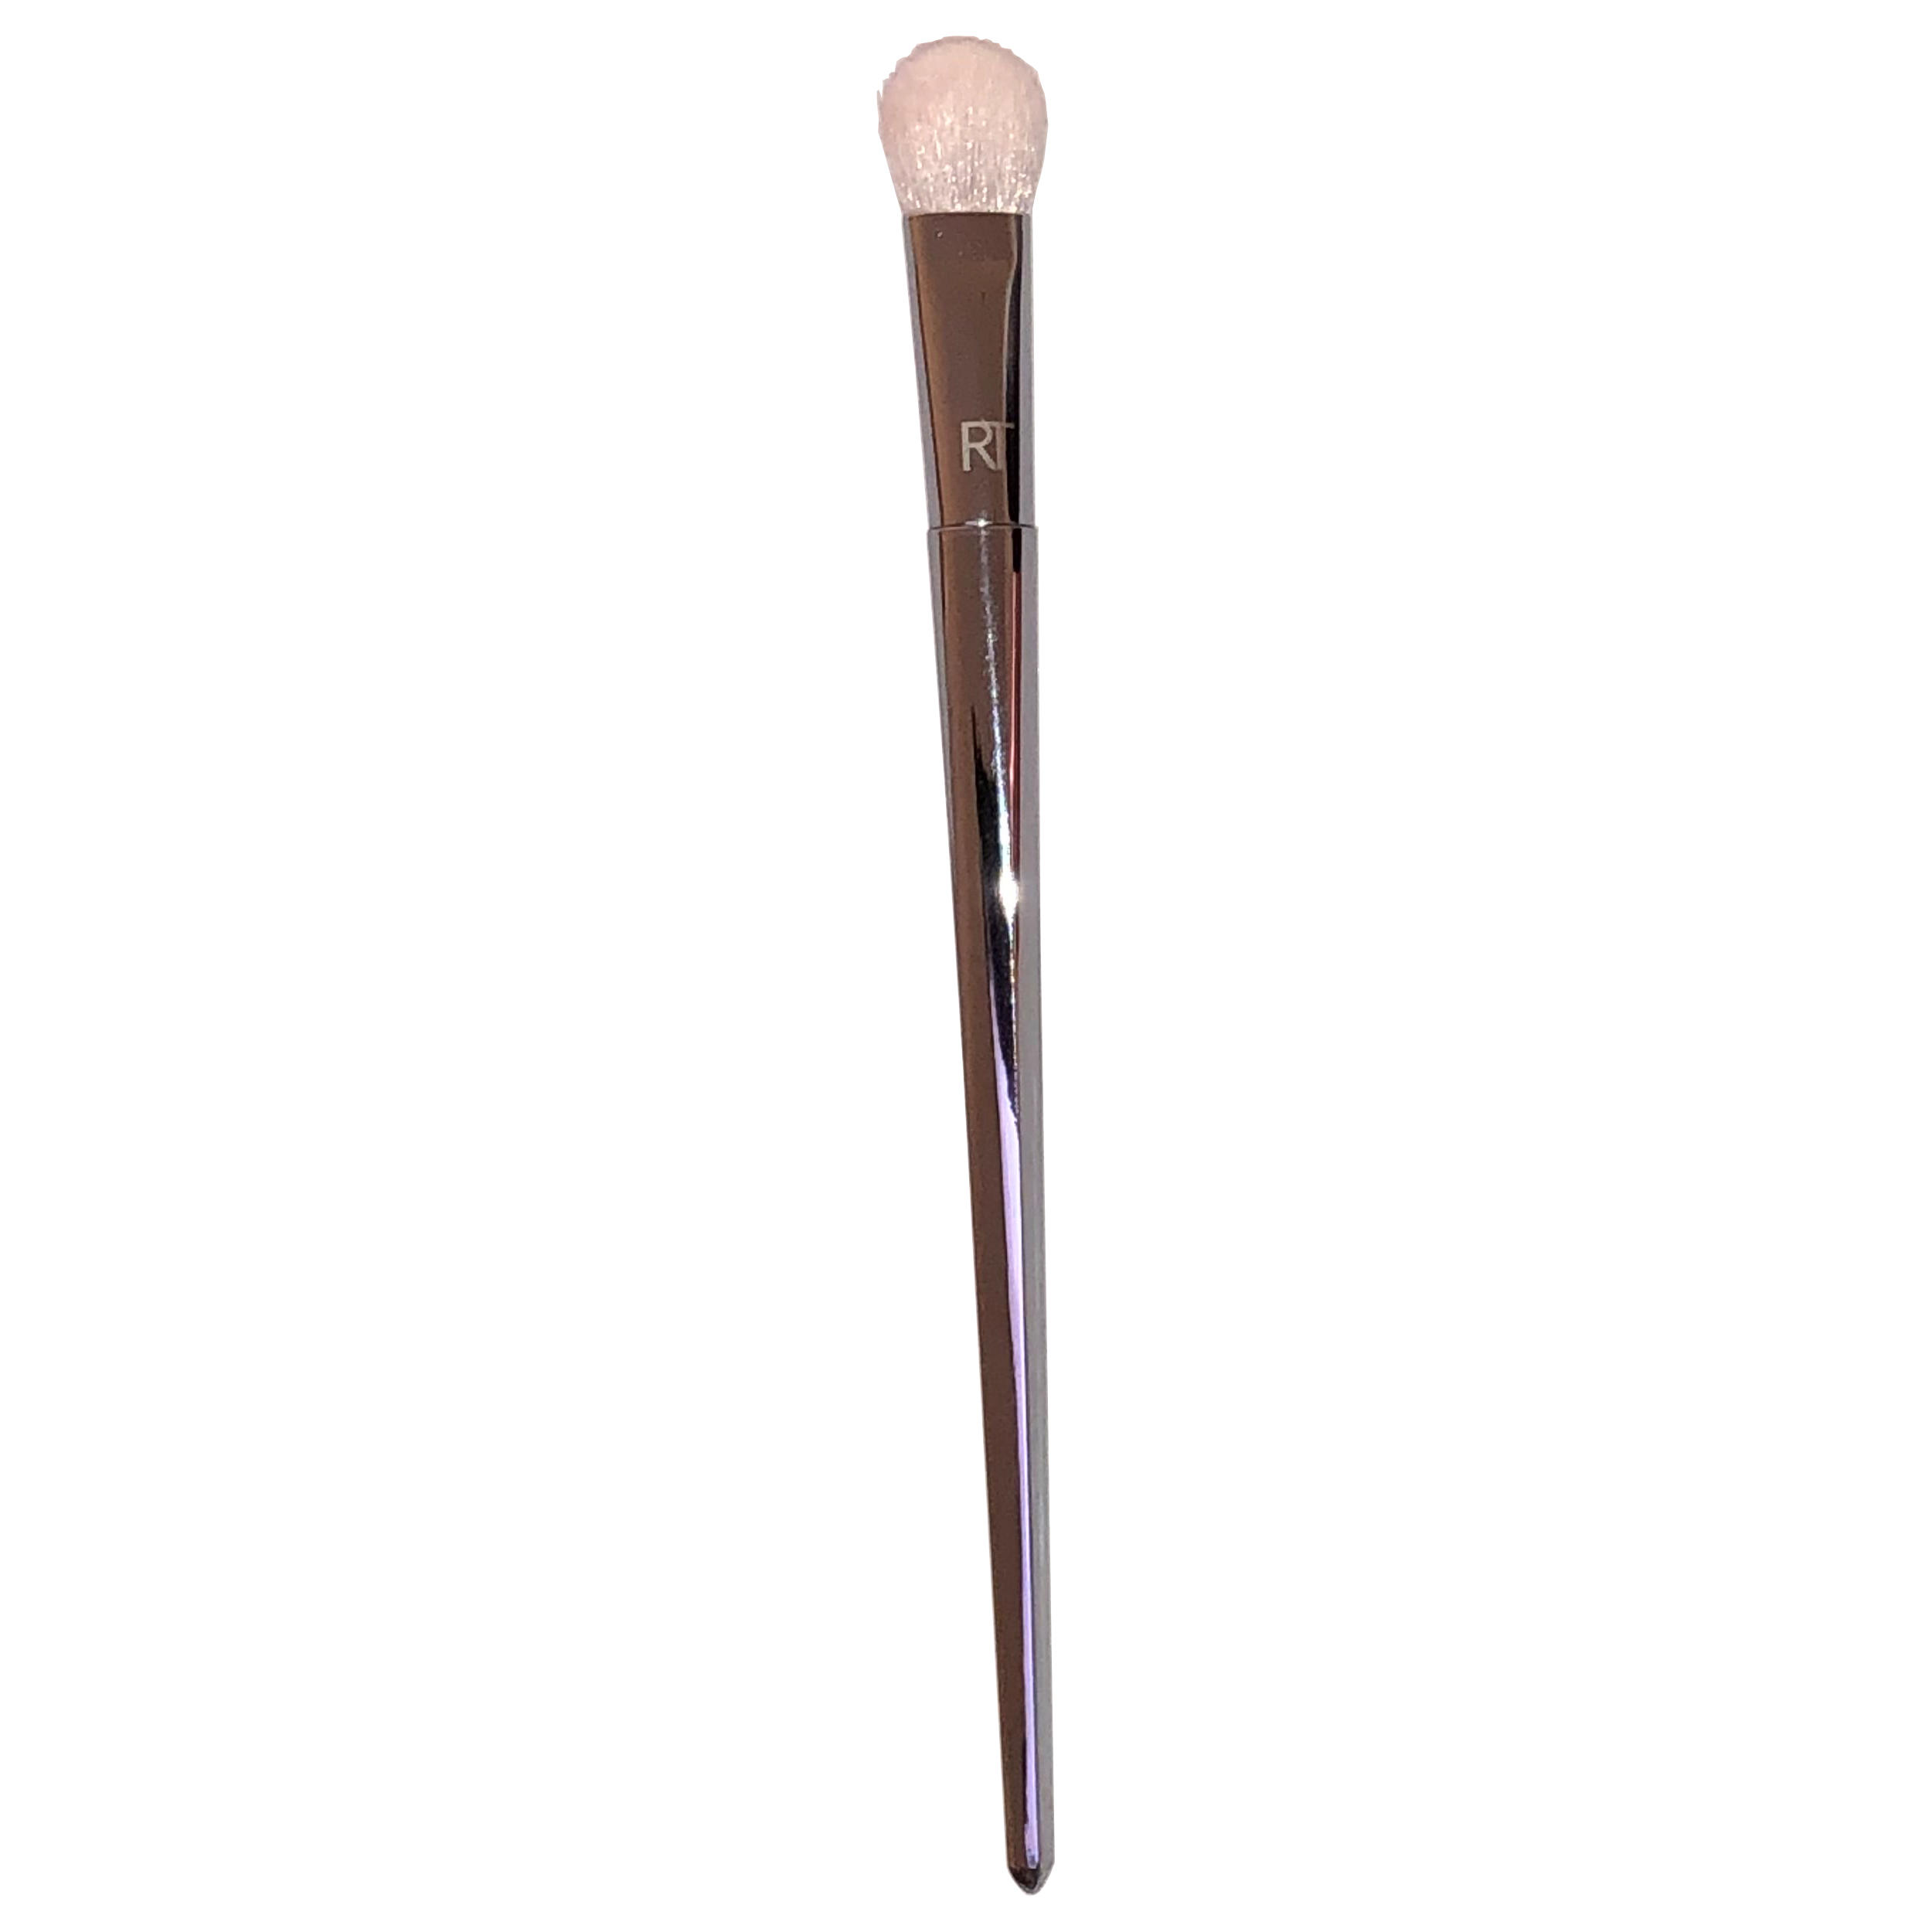 Real Techniques Flat Rounded Eye Brush Silver